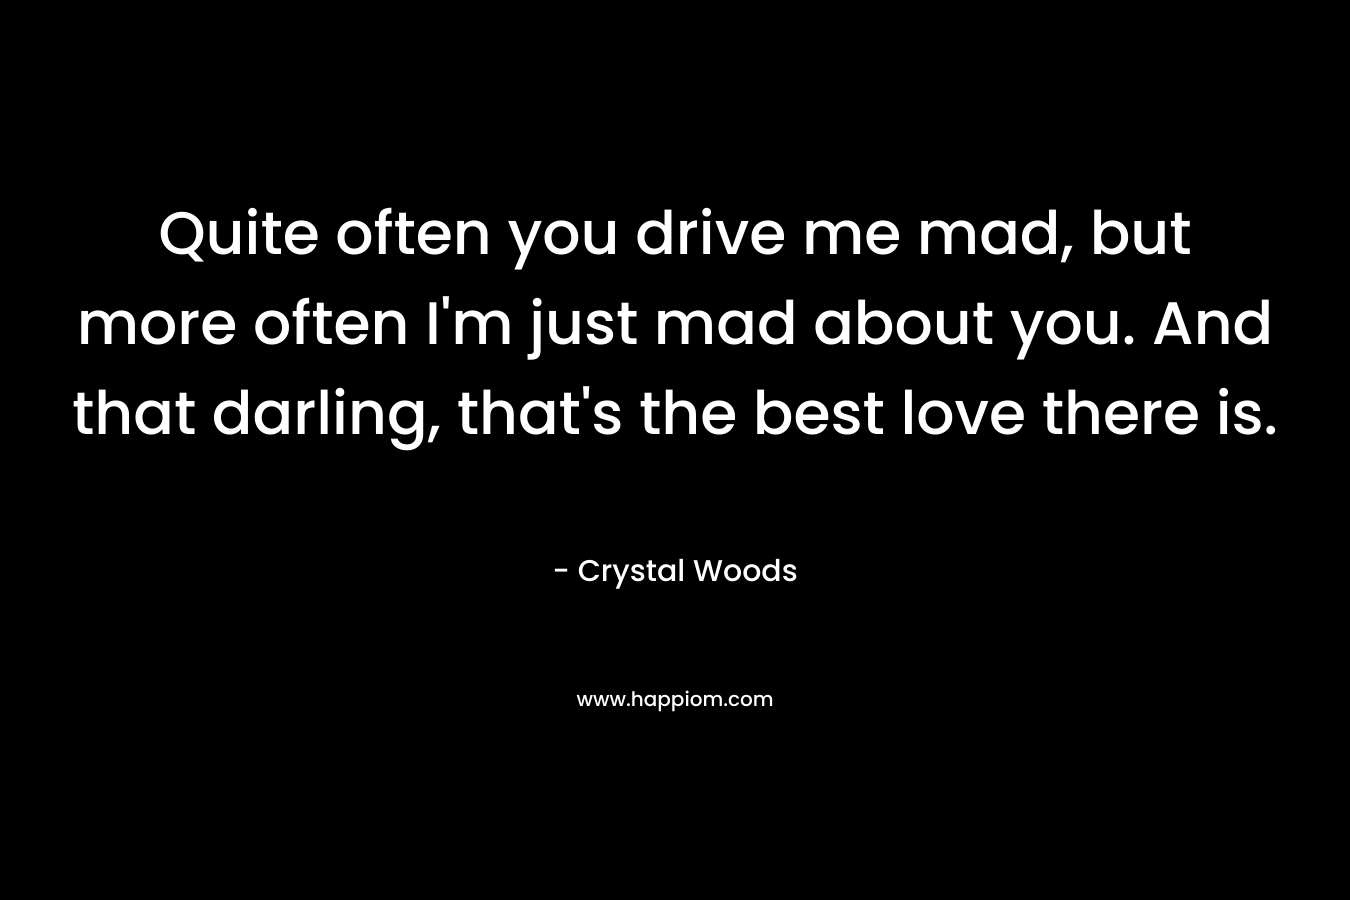 Quite often you drive me mad, but more often I’m just mad about you. And that darling, that’s the best love there is. – Crystal Woods